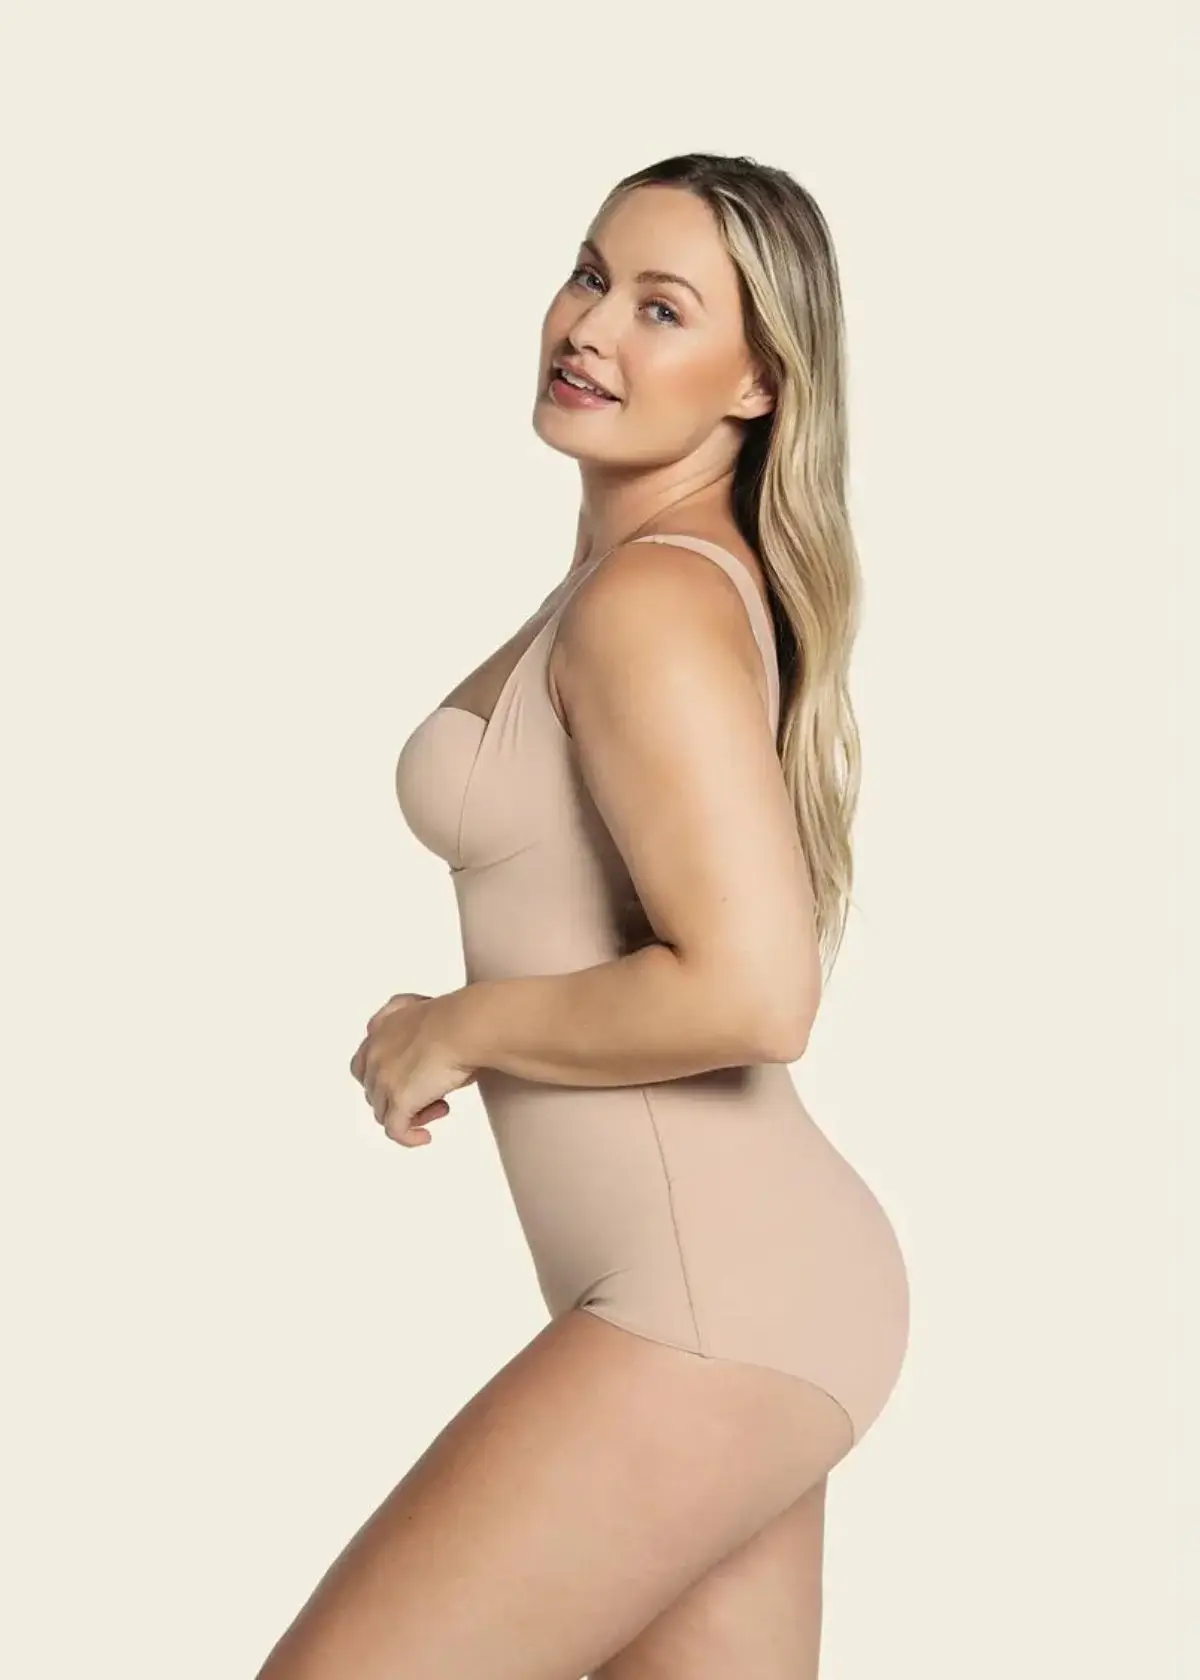 Is shapewear suitable for all body shapes and sizes?